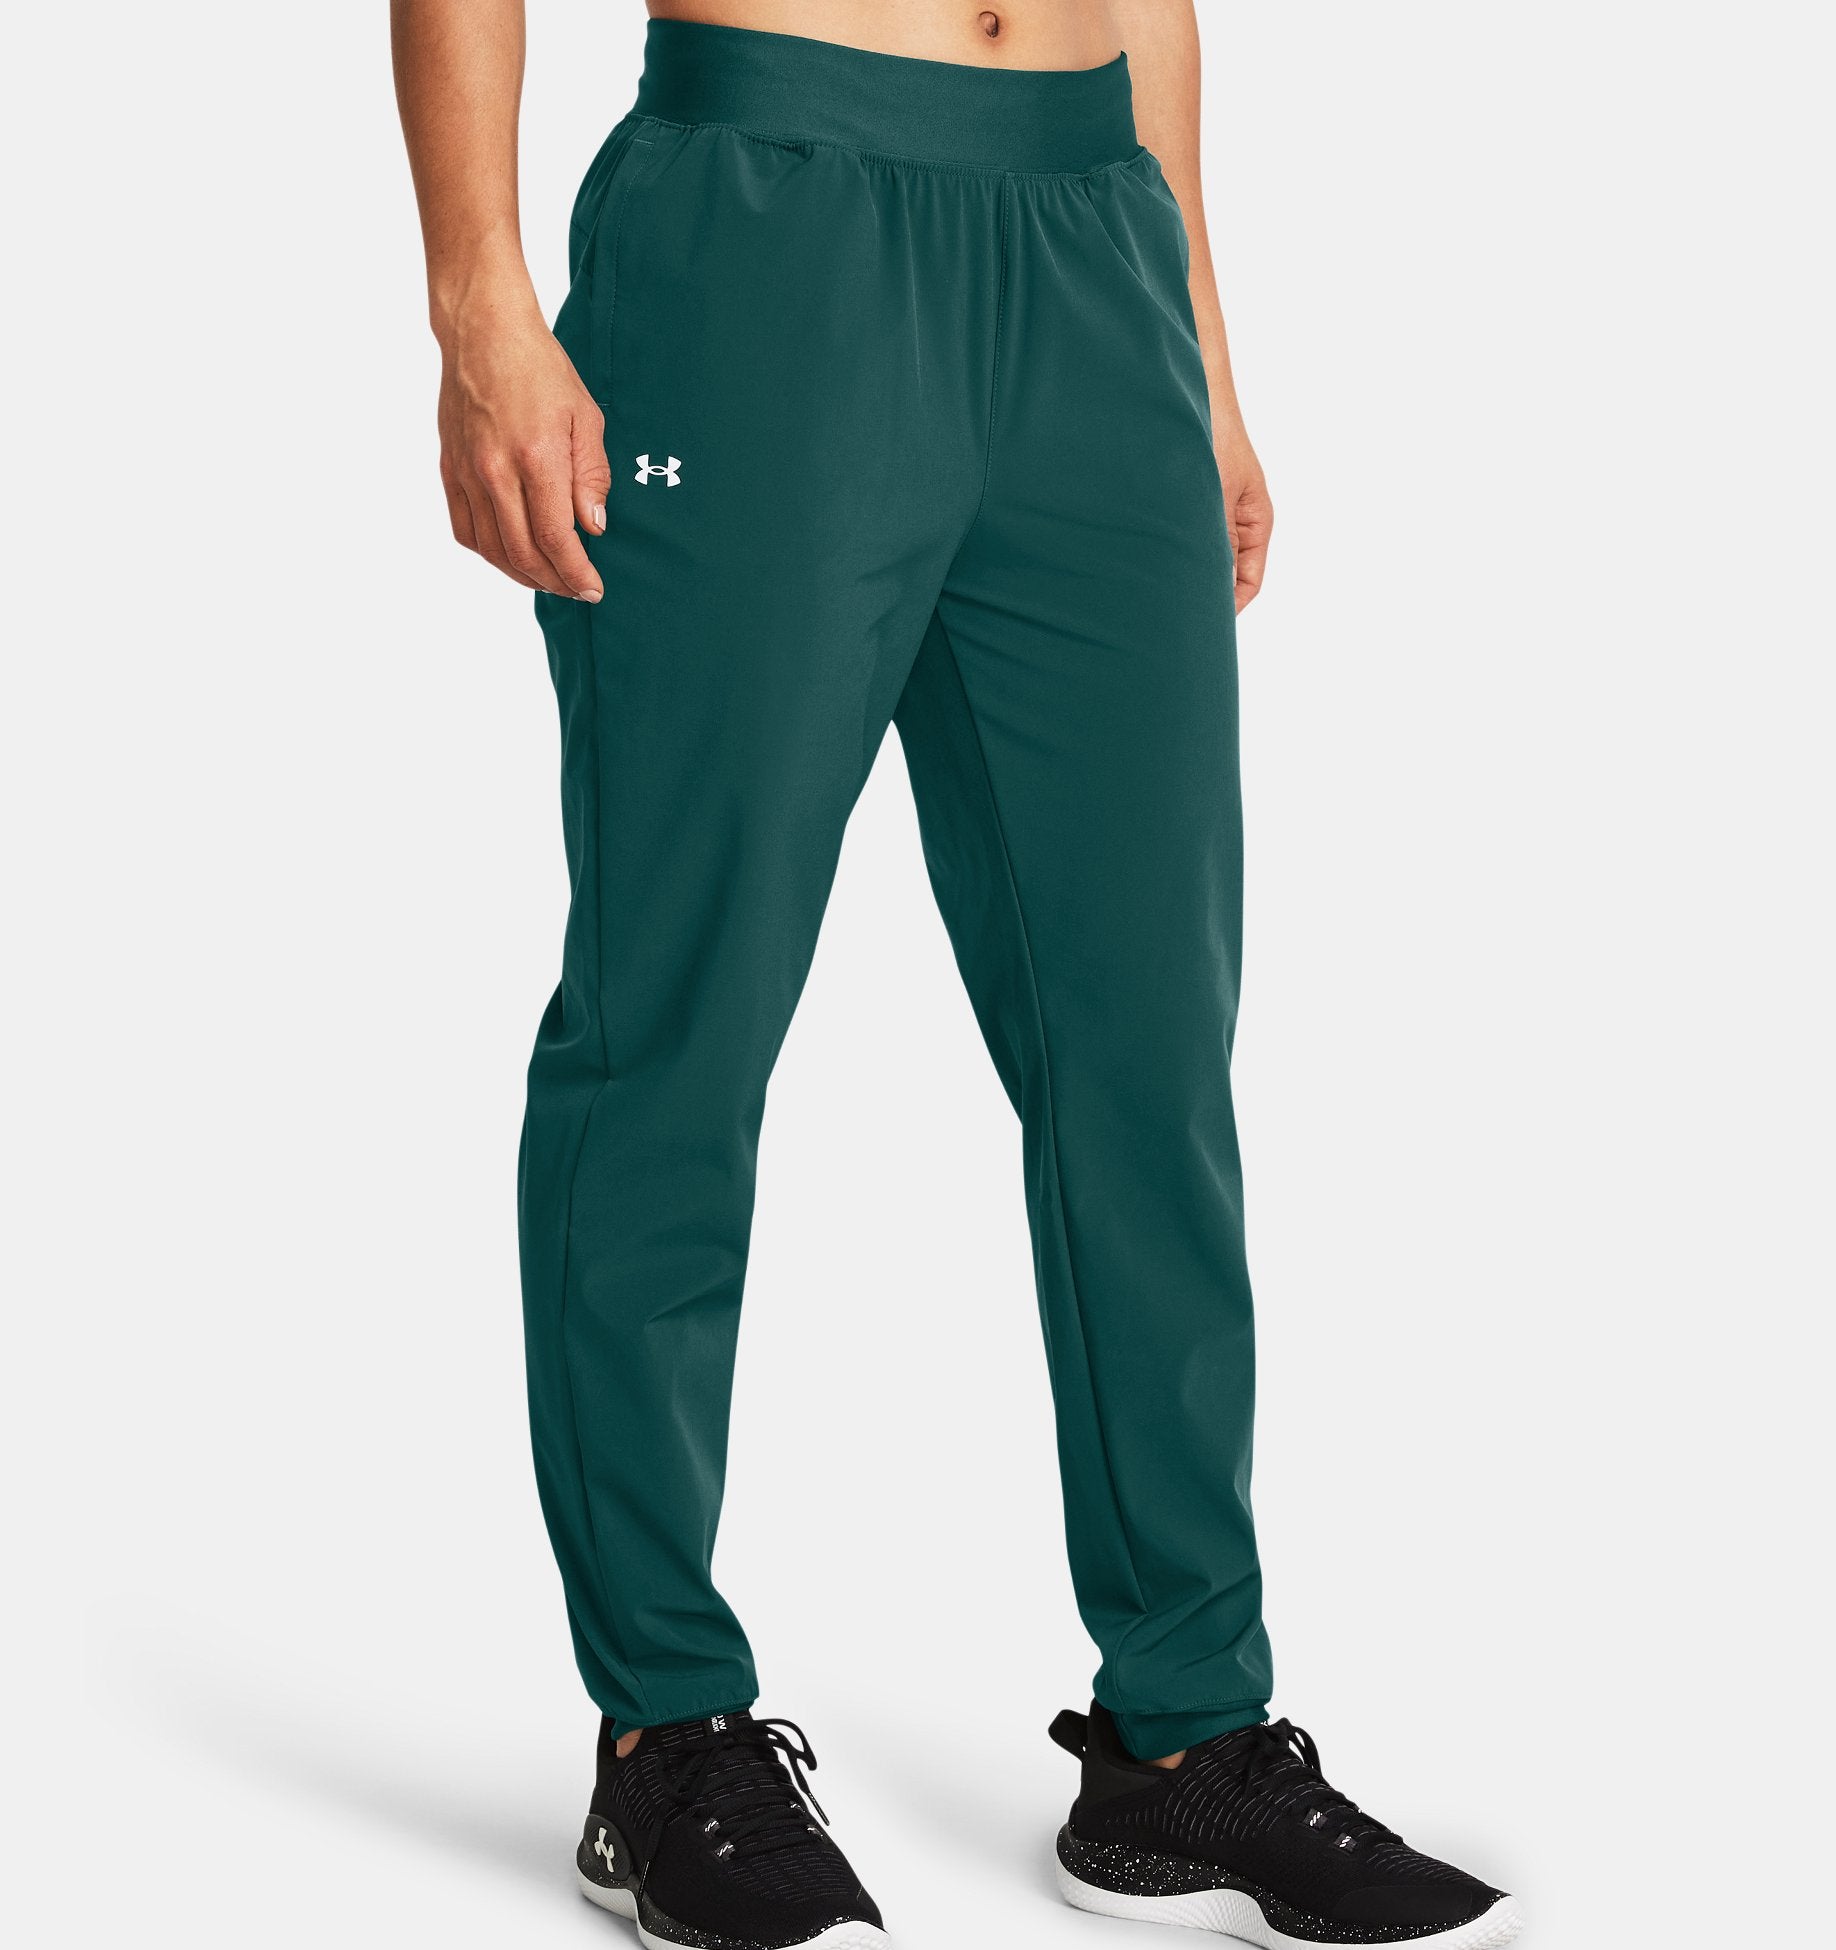 ARMOUR SPORT WOVEN PANT - 1382727